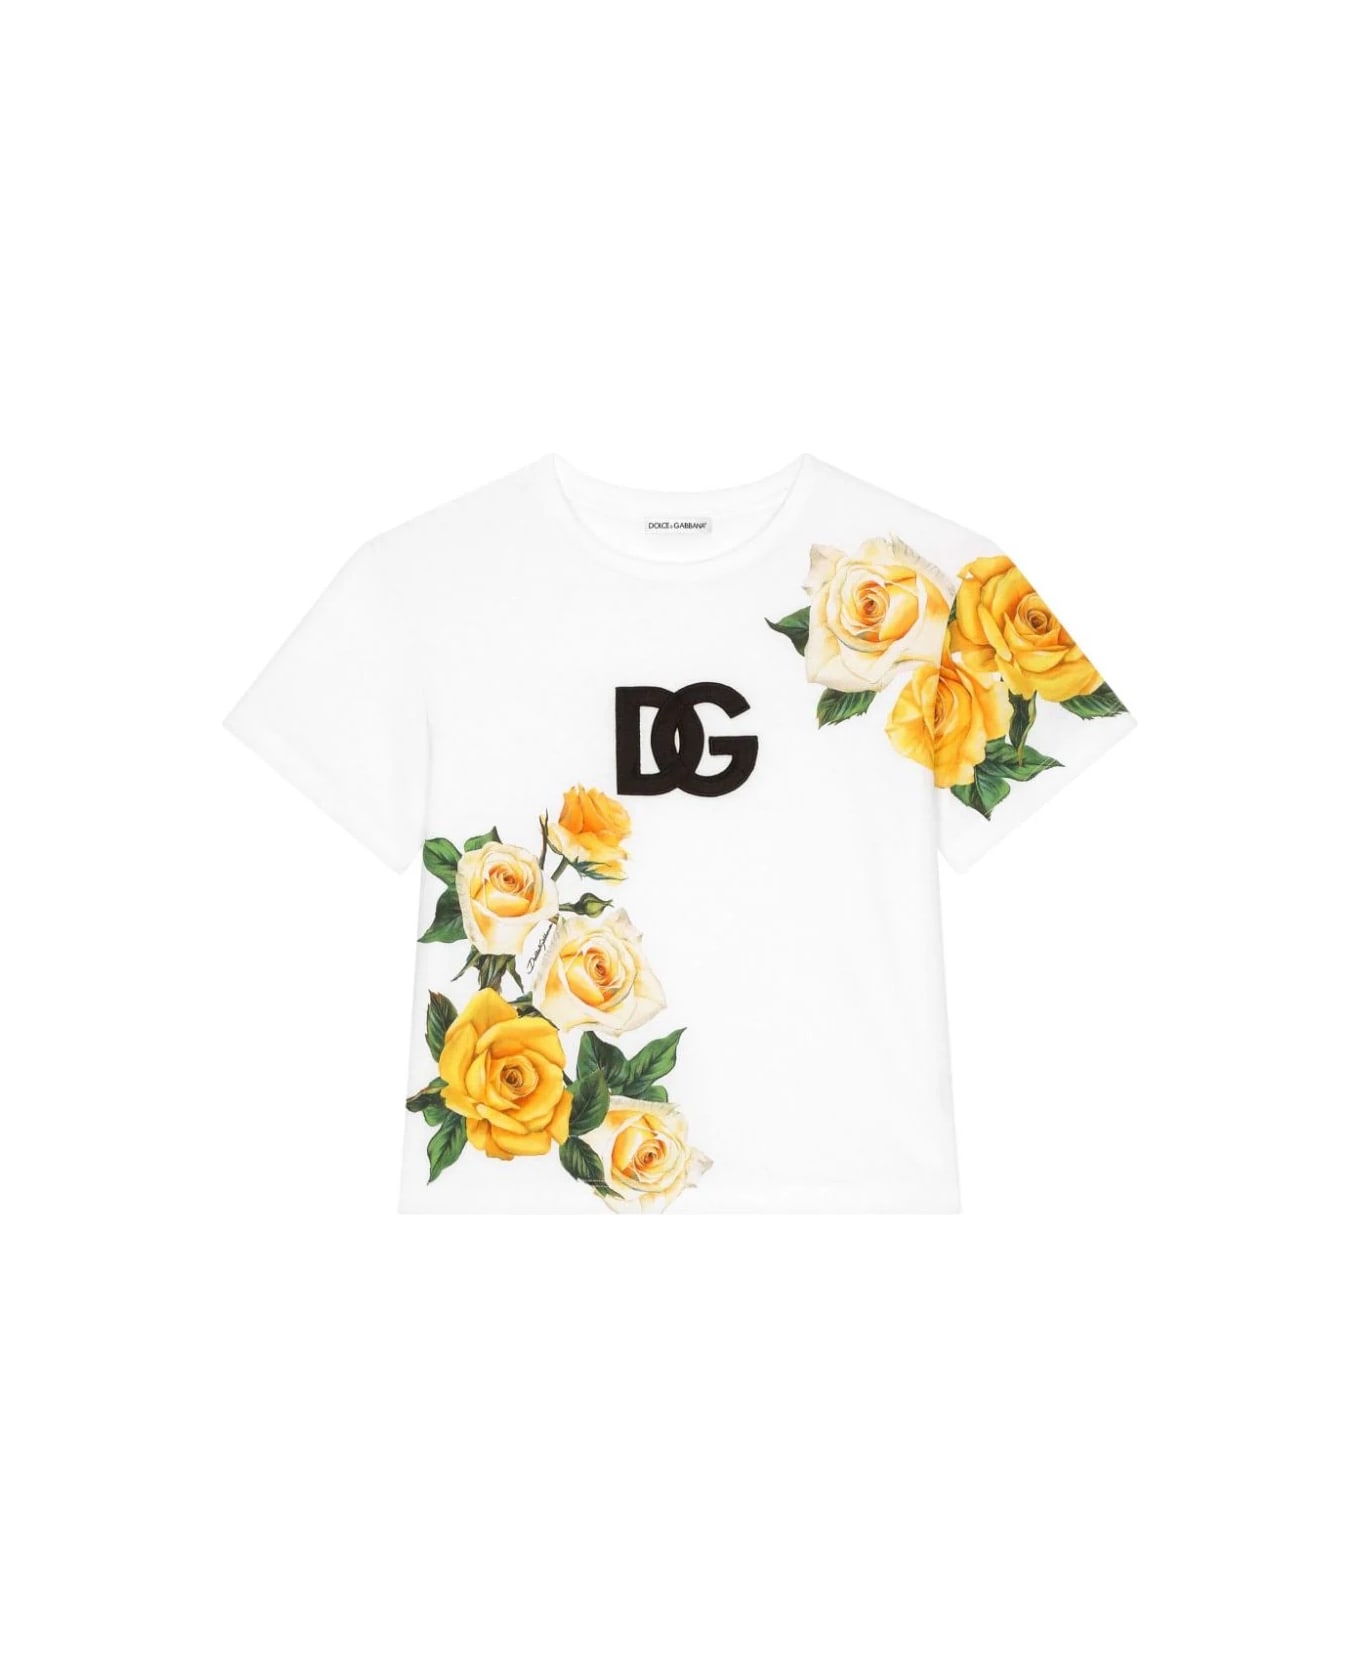 Dolce & Gabbana T-shirt With Dg Logo And Yellow Rose Print - short sleeve polo shirt with contrast collar and sleeve hems and embroidered